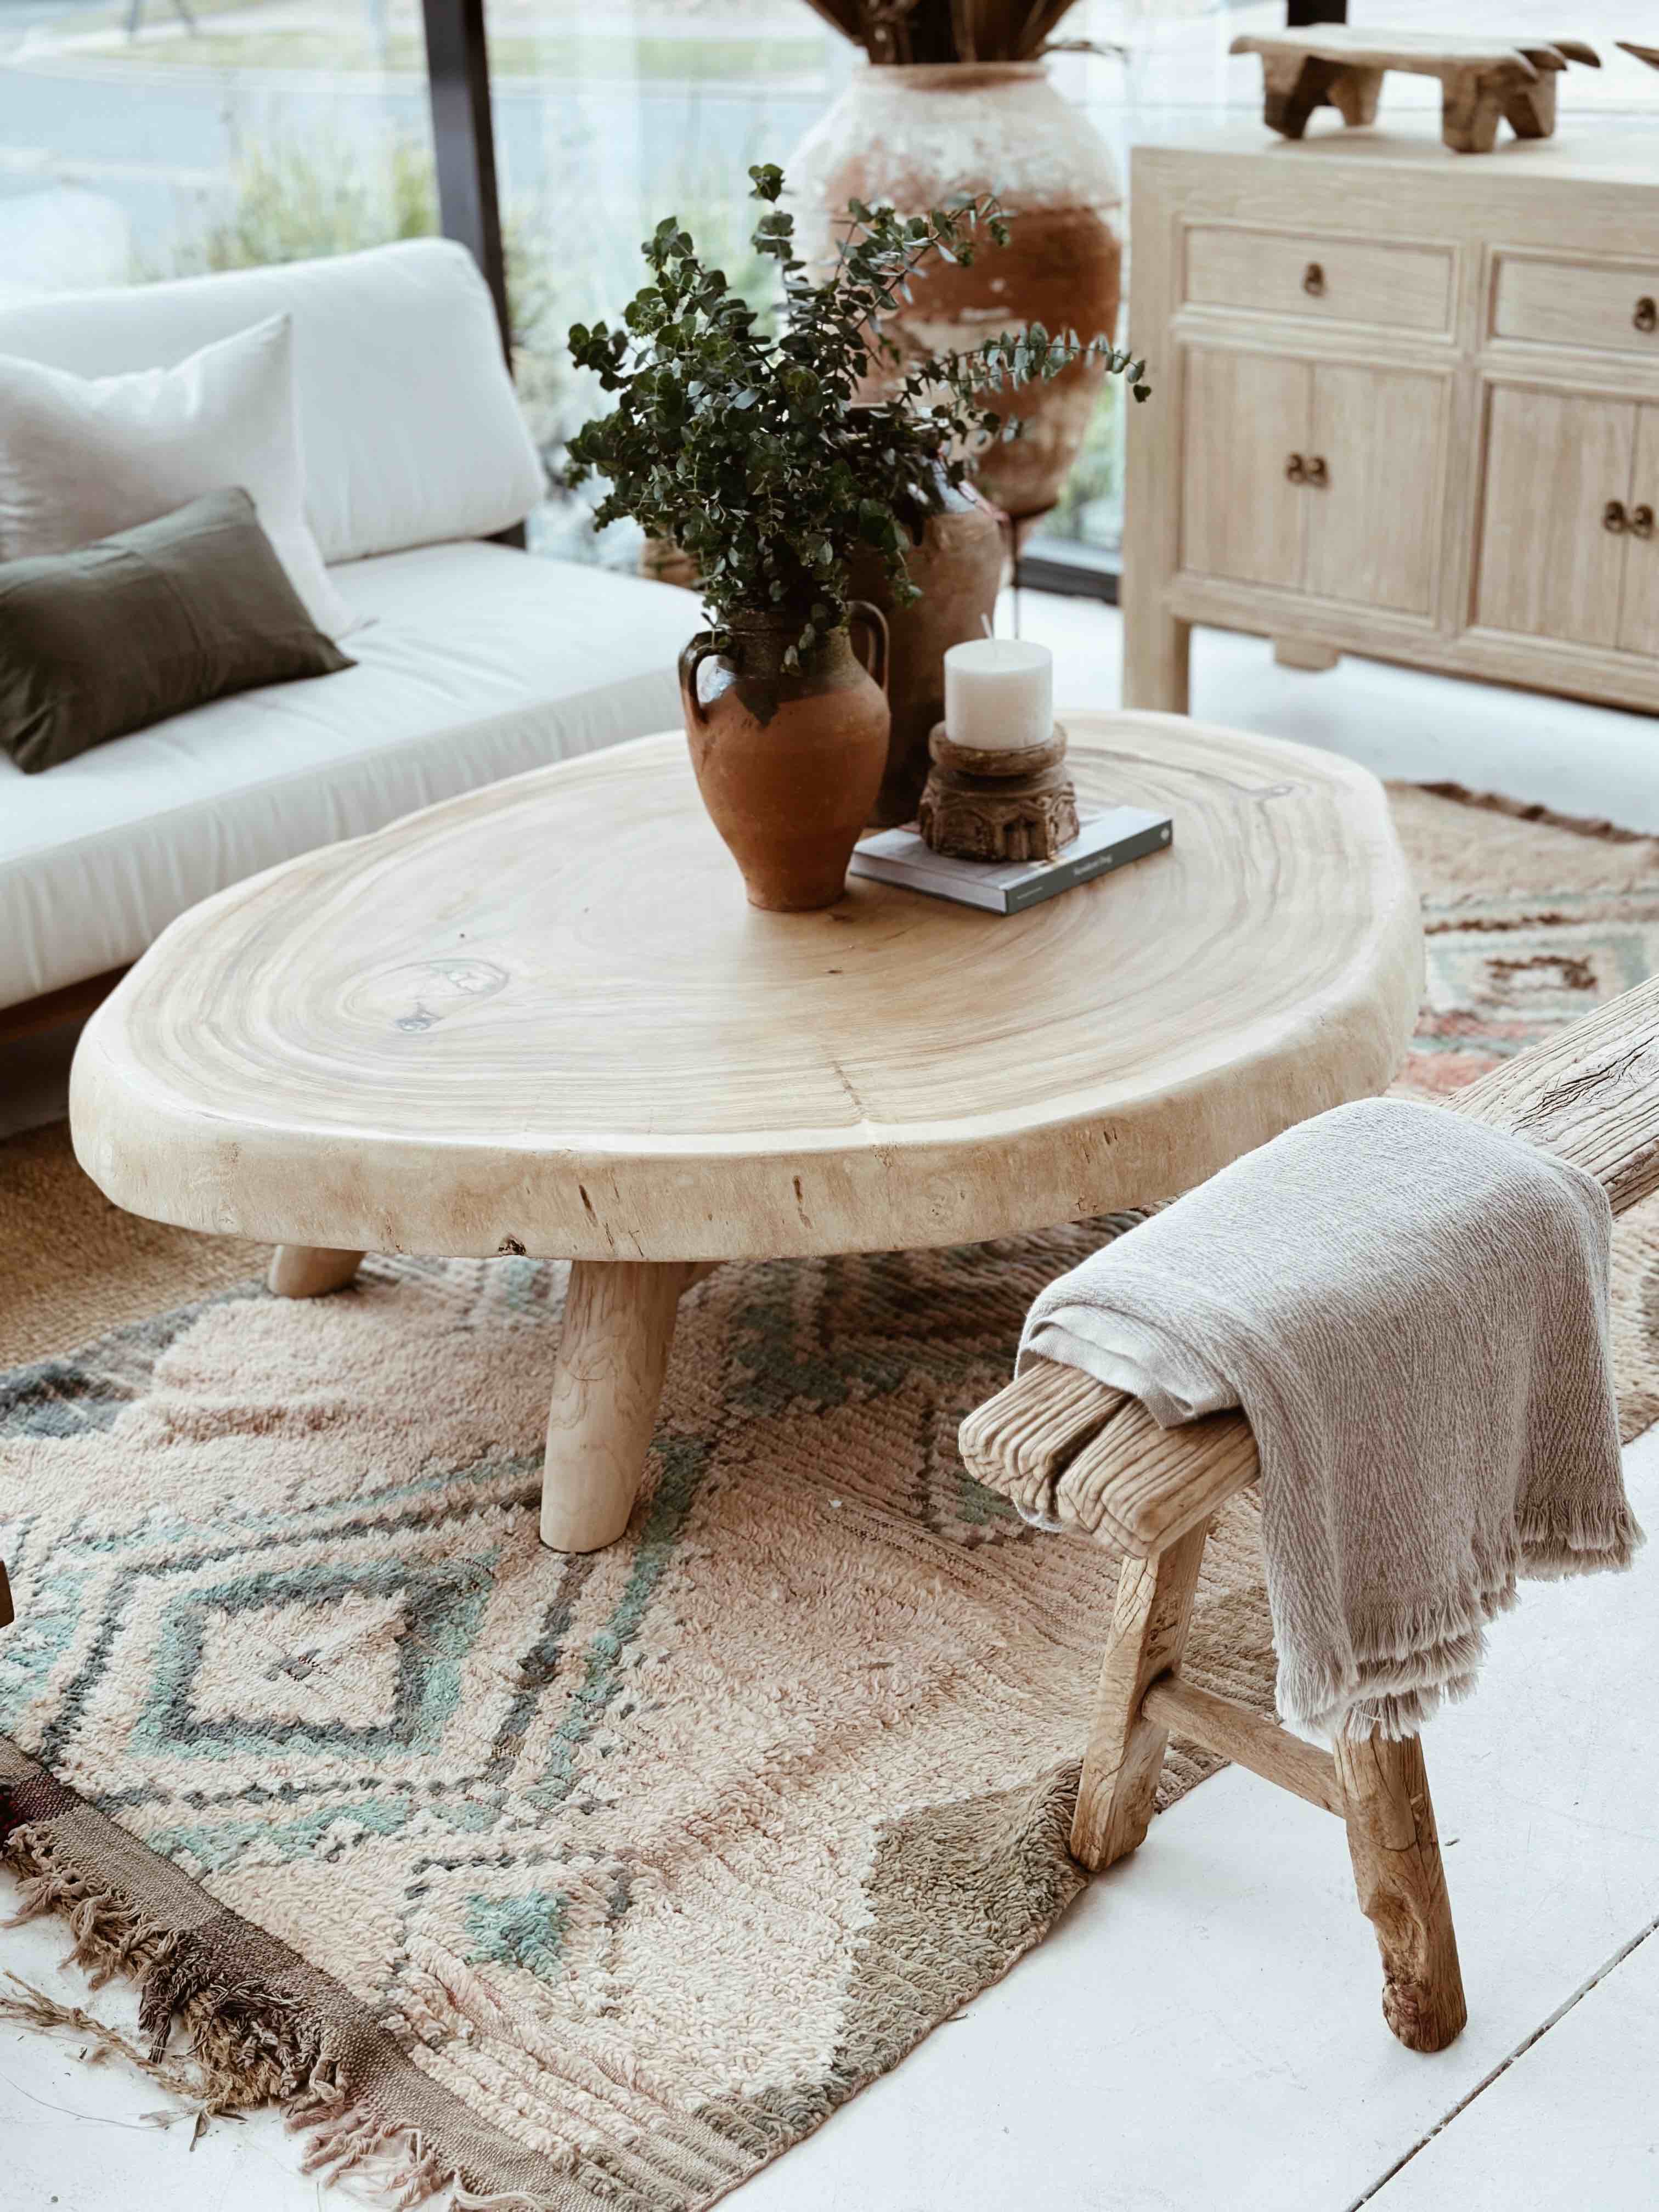 Styling Tips for the Coffee Table: Expectations vs. Reality